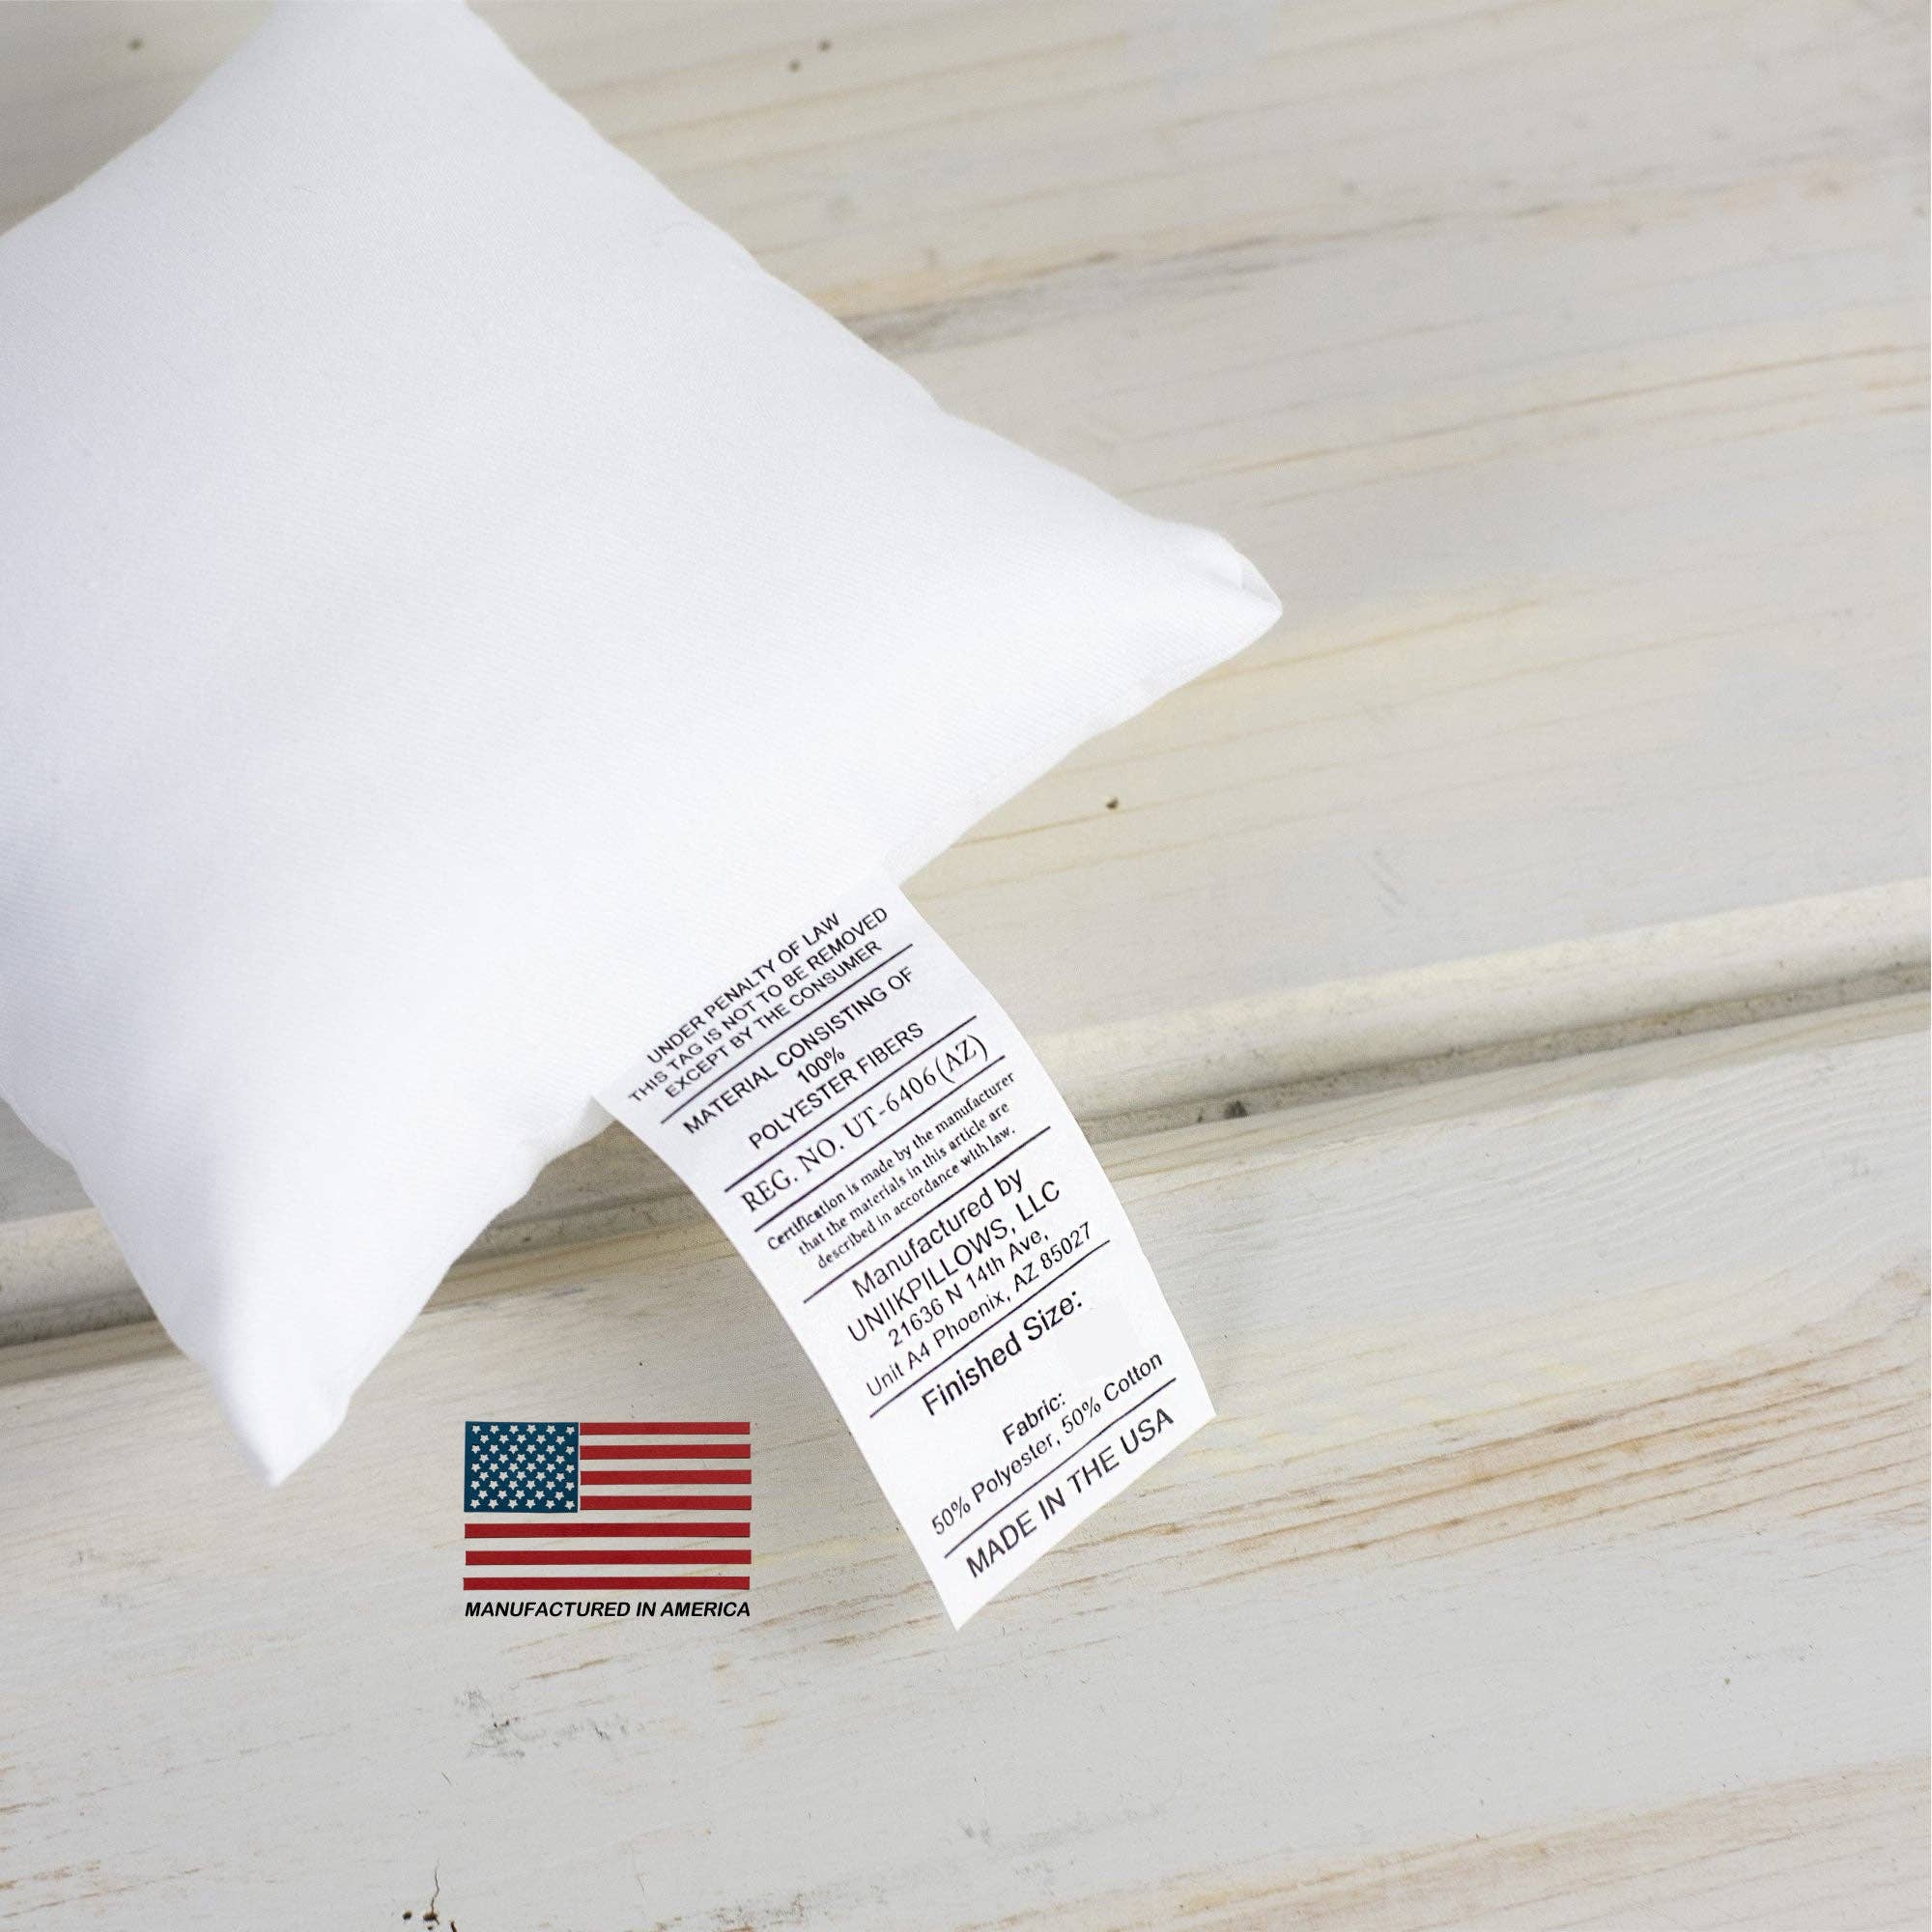 Pillow Form 14x14 Inches Bed Pillow Insert Polyester Fiberfill Wholesale Inserts  Pillow Stuffing Filled Cushion Pillow Filler 